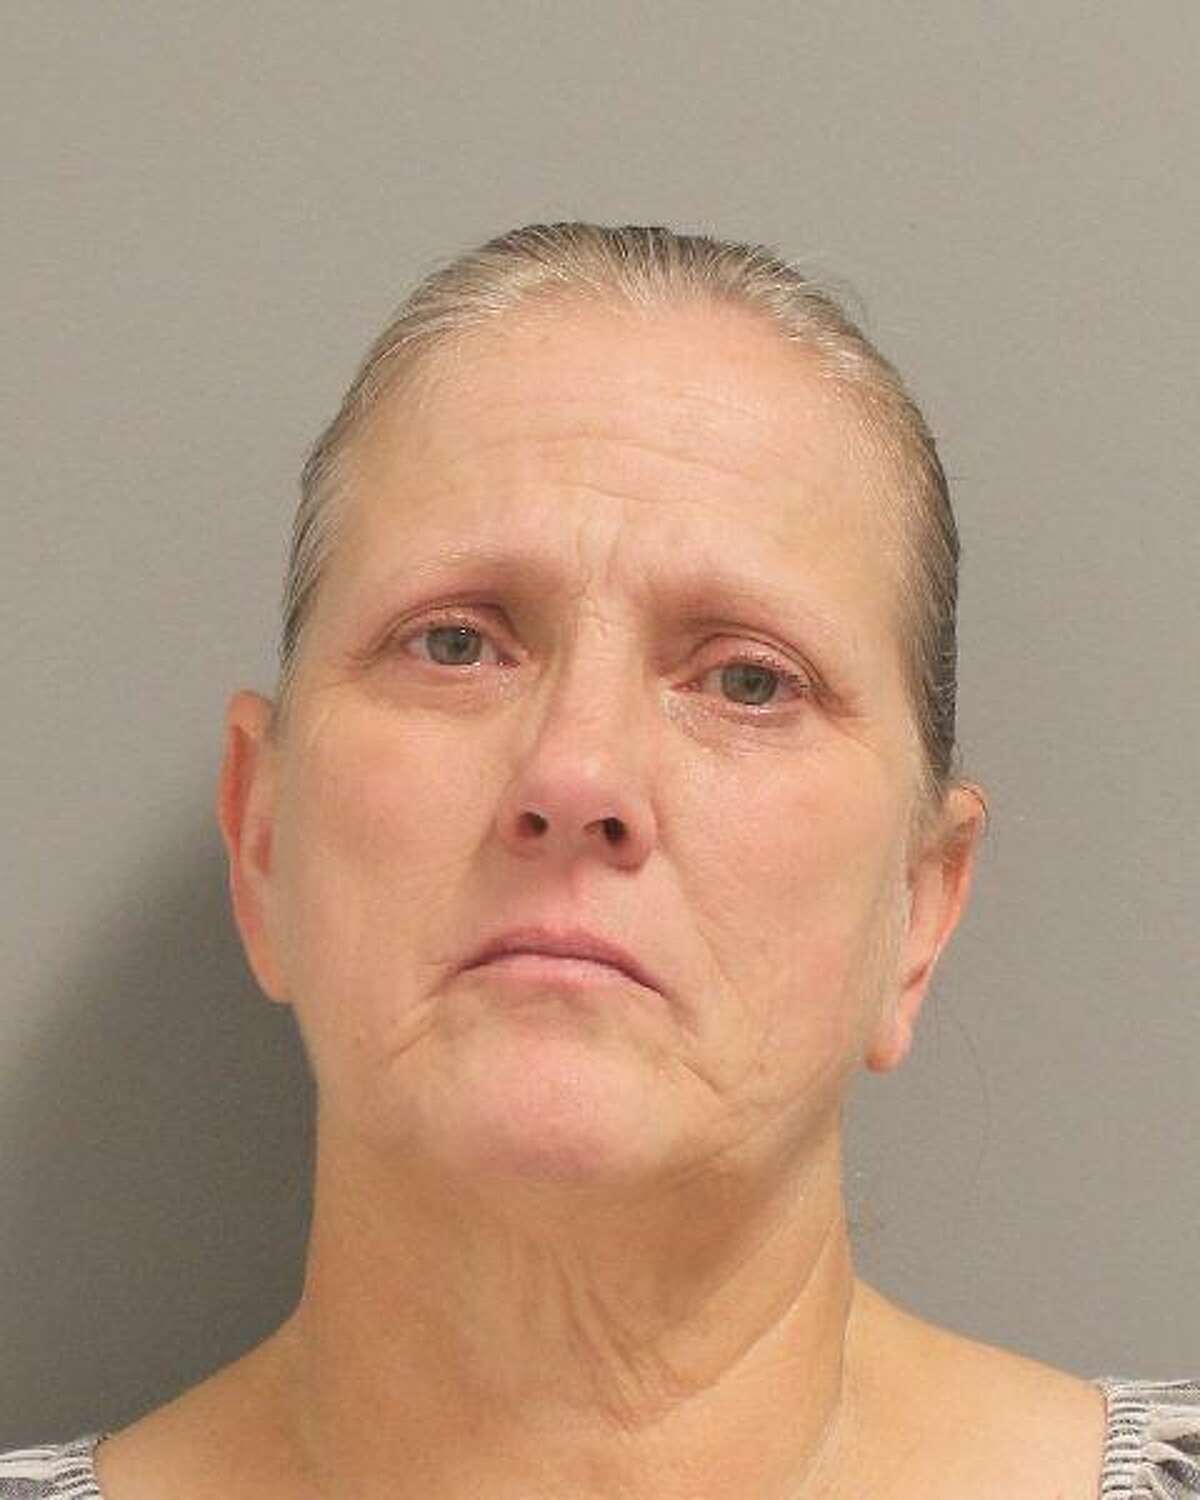 Jeanna Hooker, 56, of Pasadena, is facing two charges of practicing medicine without a veterinary license after police say she illegally performed medical procedures on two cats at the Deer Park Animal Control and Shelter. Hooker, an employee at the shelter for over 10 years, has since been fired by the city.